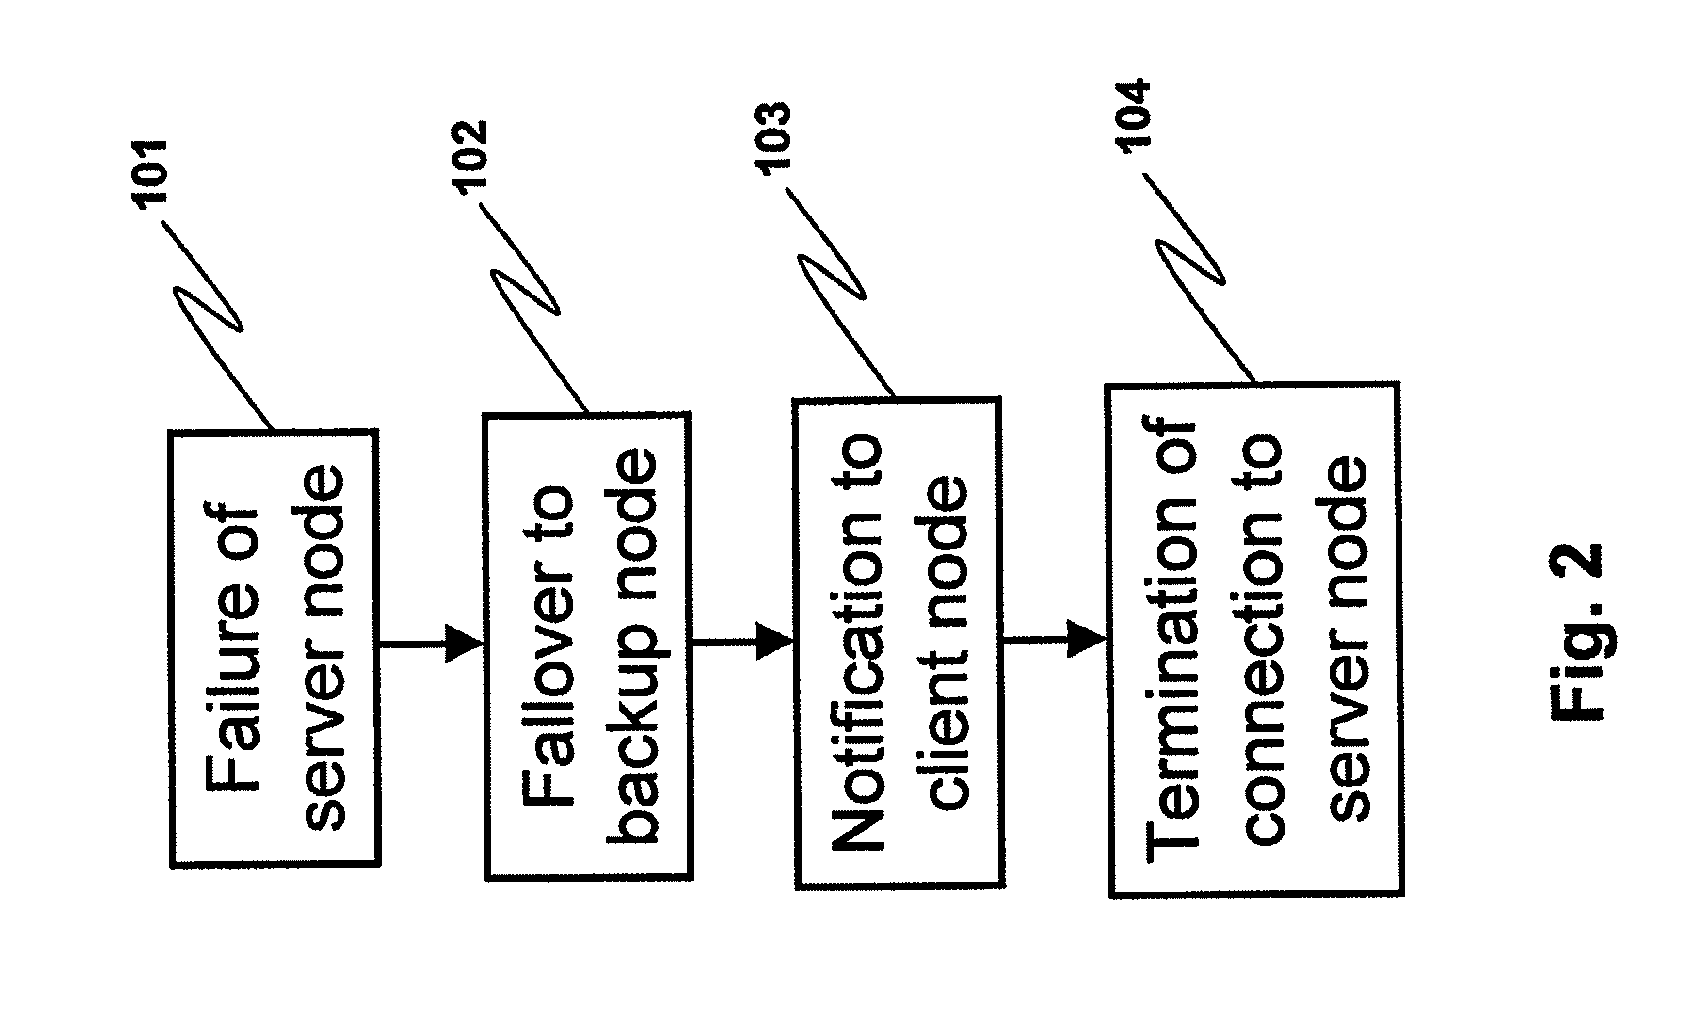 Method for enabling faster recovery of client applications in the event of server failure